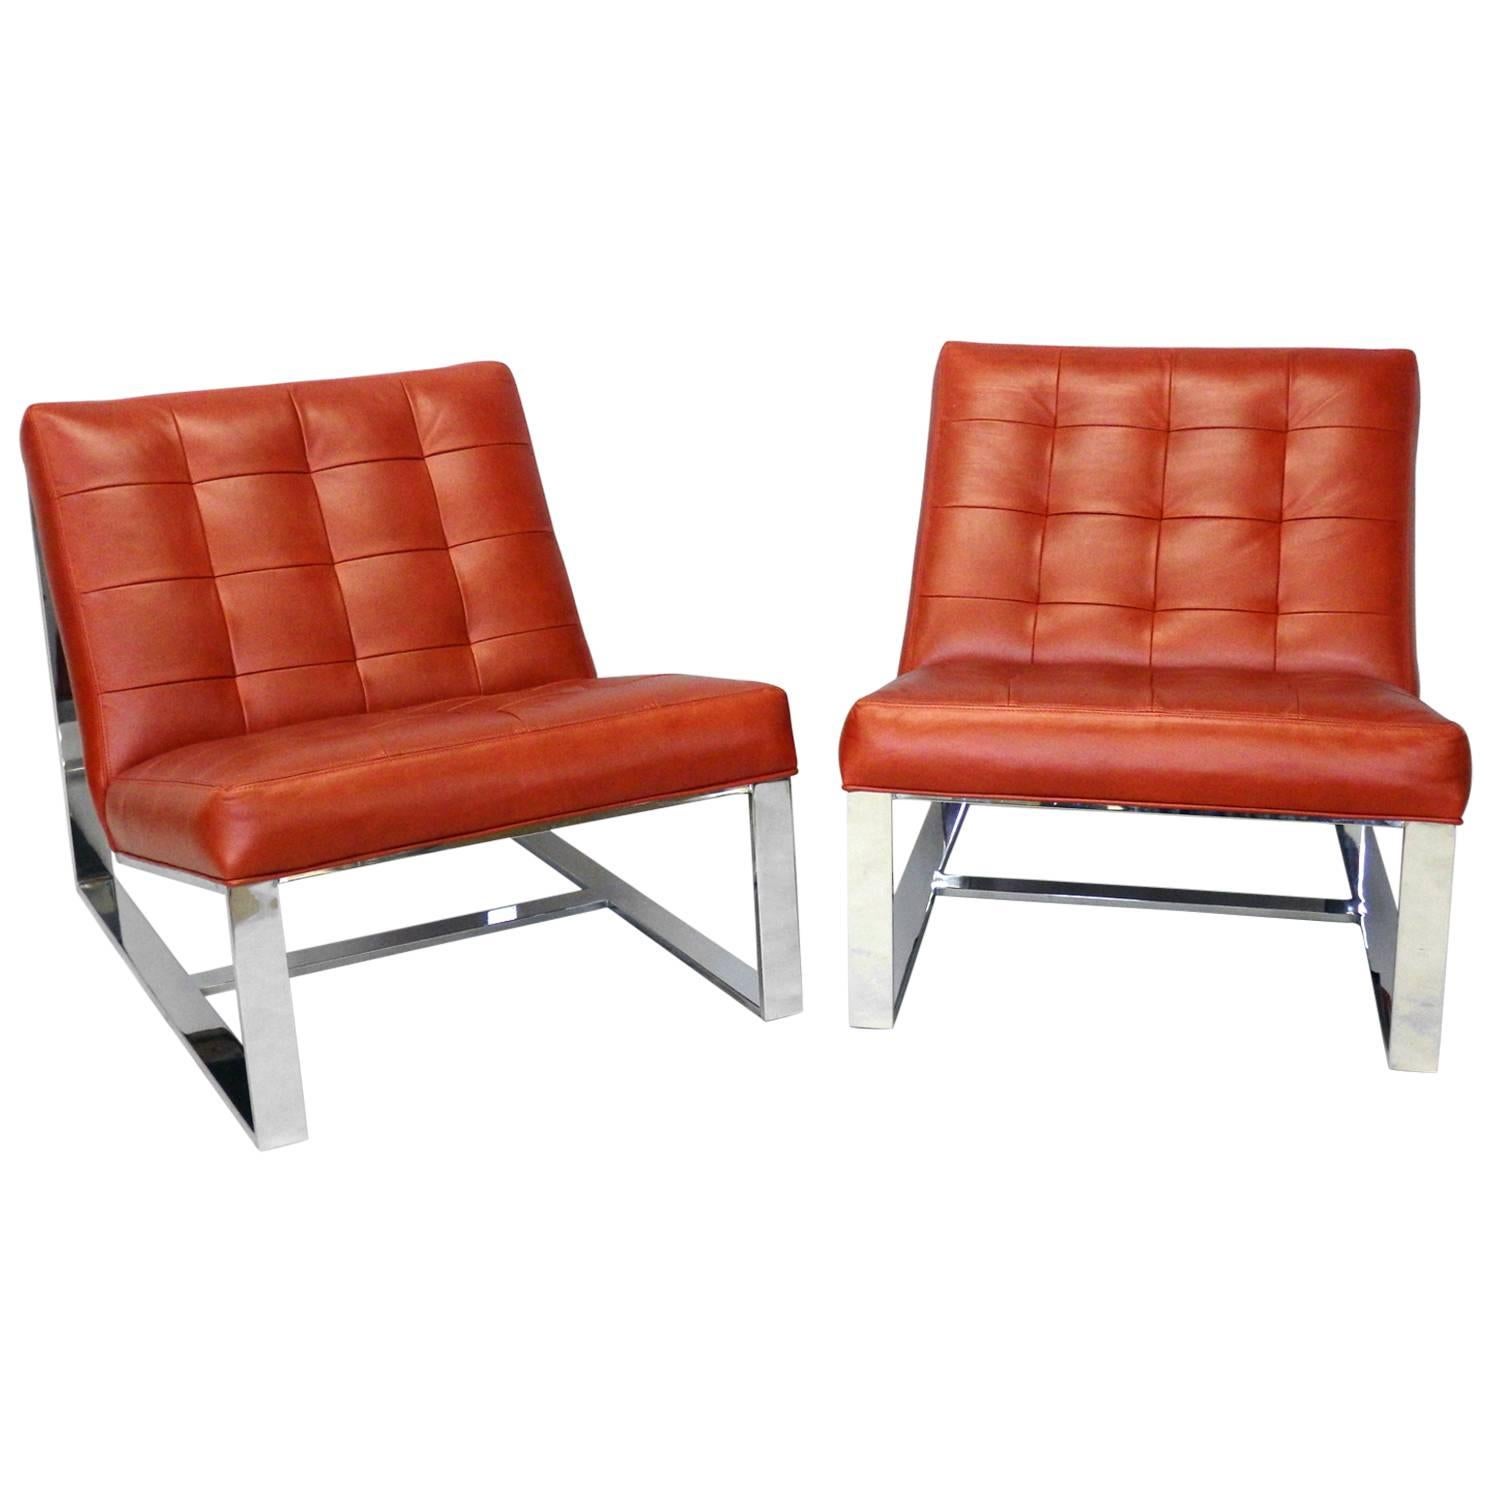 Pair of Milo Baughman Red Leather on Chrome Open Arm  Lounge Chairs